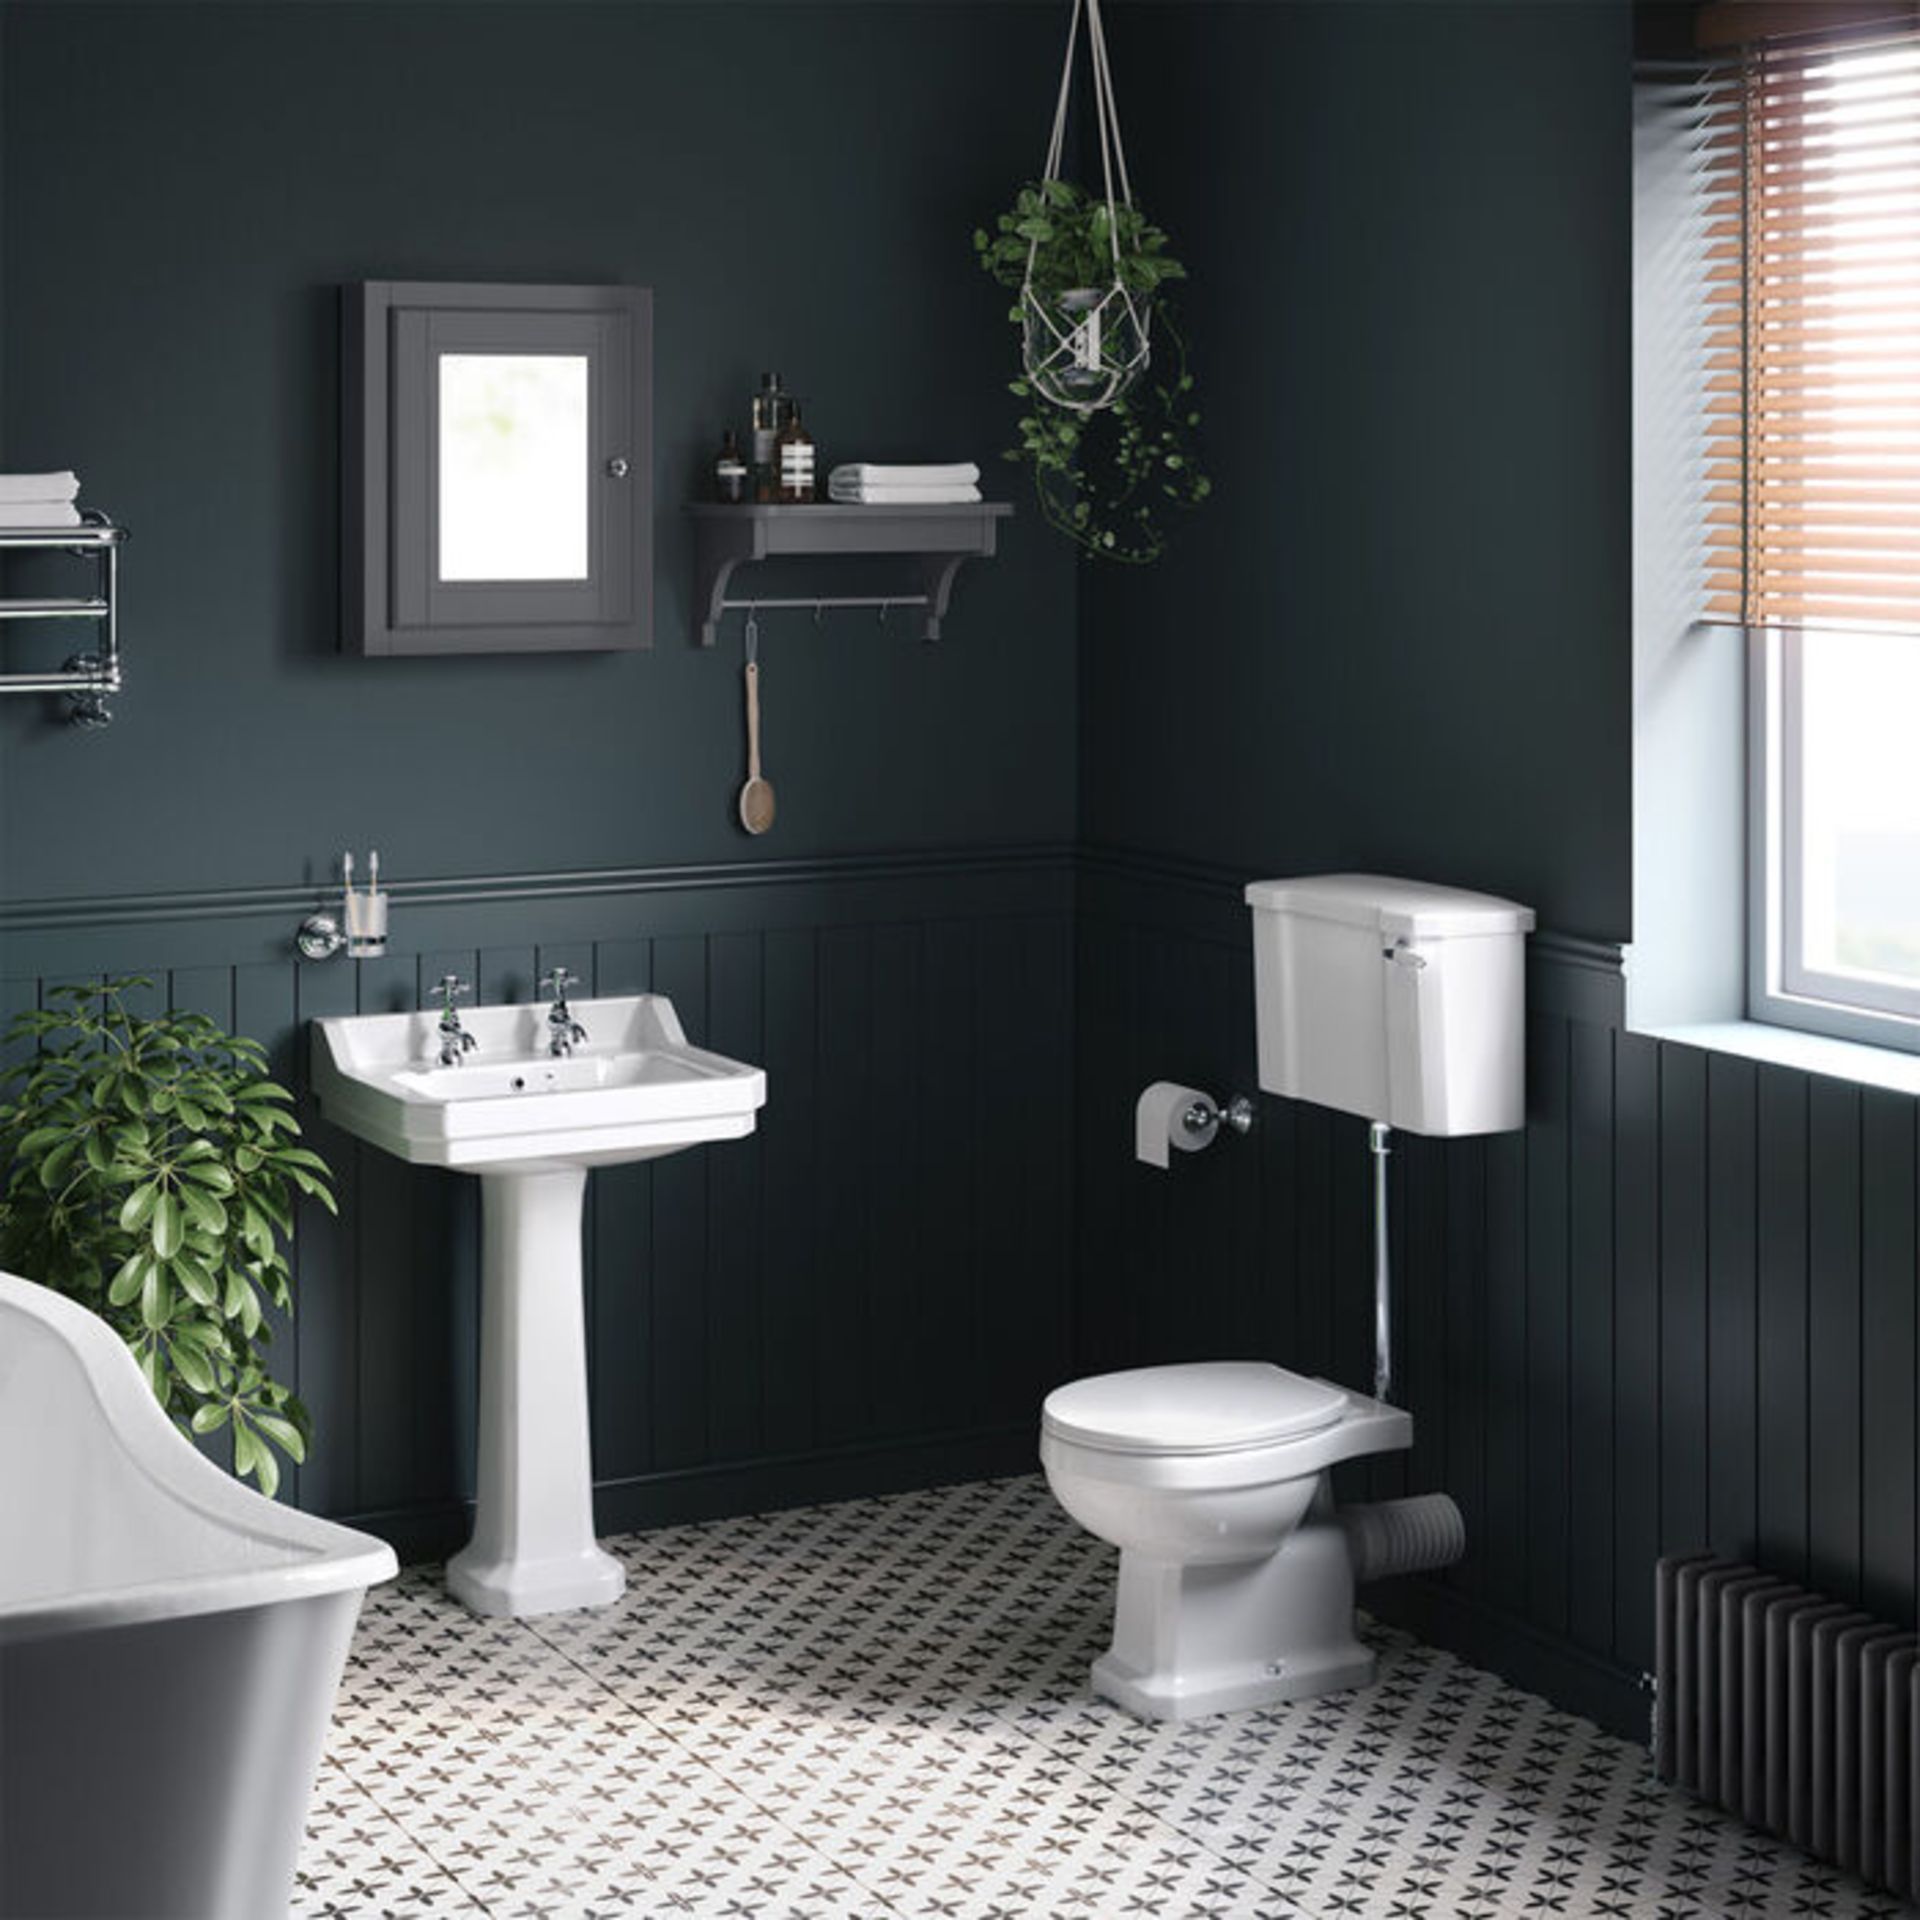 New & Boxed Tradiational Cambridge Low-Level Cistern Toilet- With Luxury Soft Close Seat.